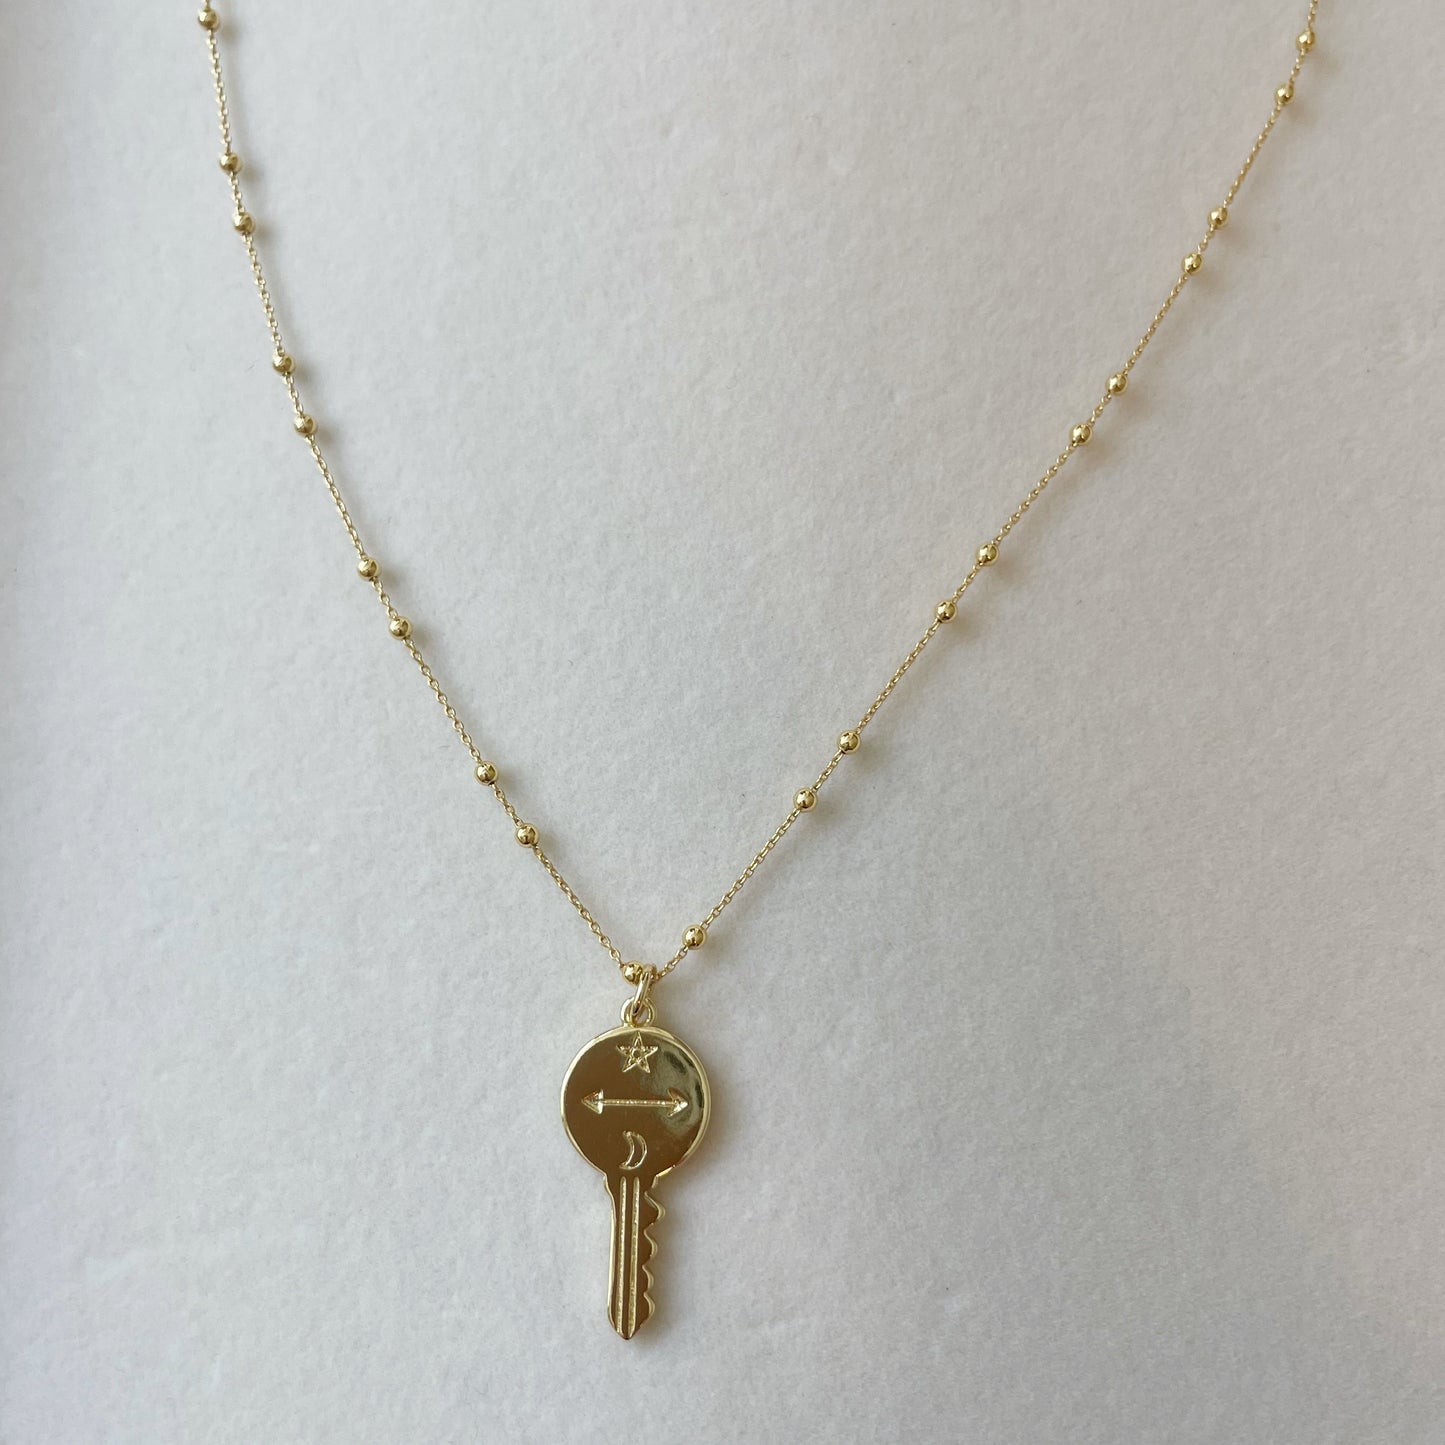 Free Your Mind Gold Filled Key Charm Necklace